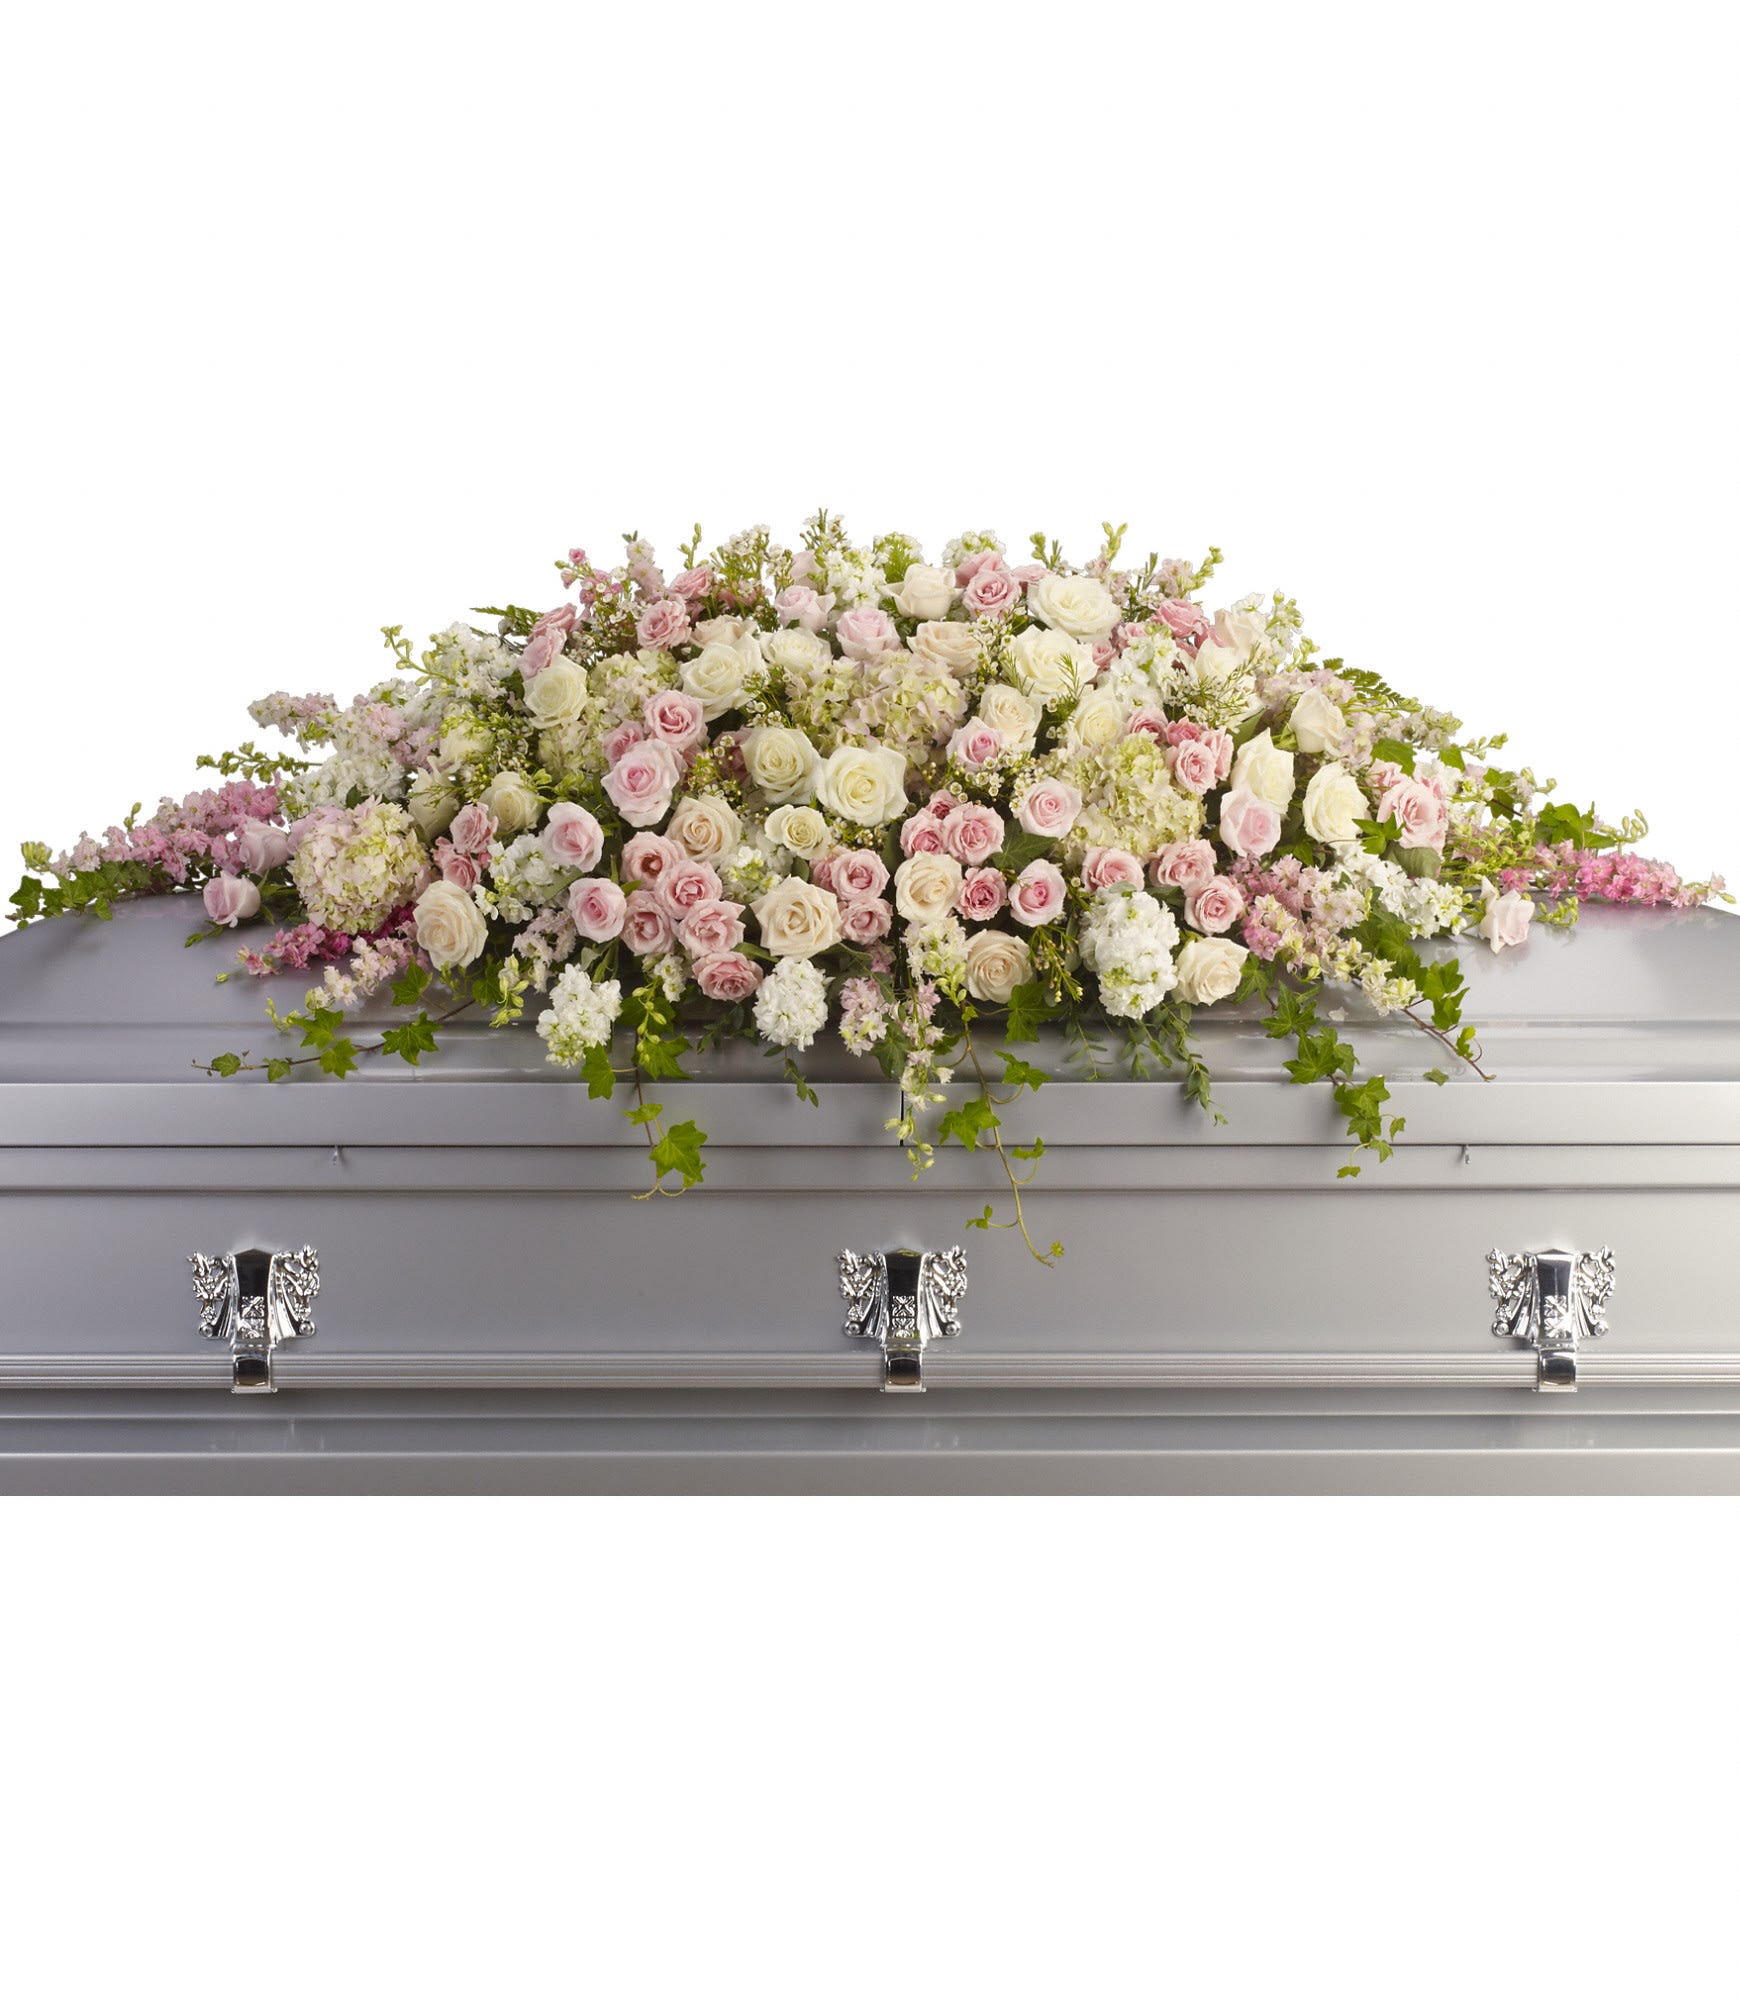 Adored Always Casket Spray  - A beautiful spray of soft pink, white and crÃ¨me blooms ease the burden of loss. 